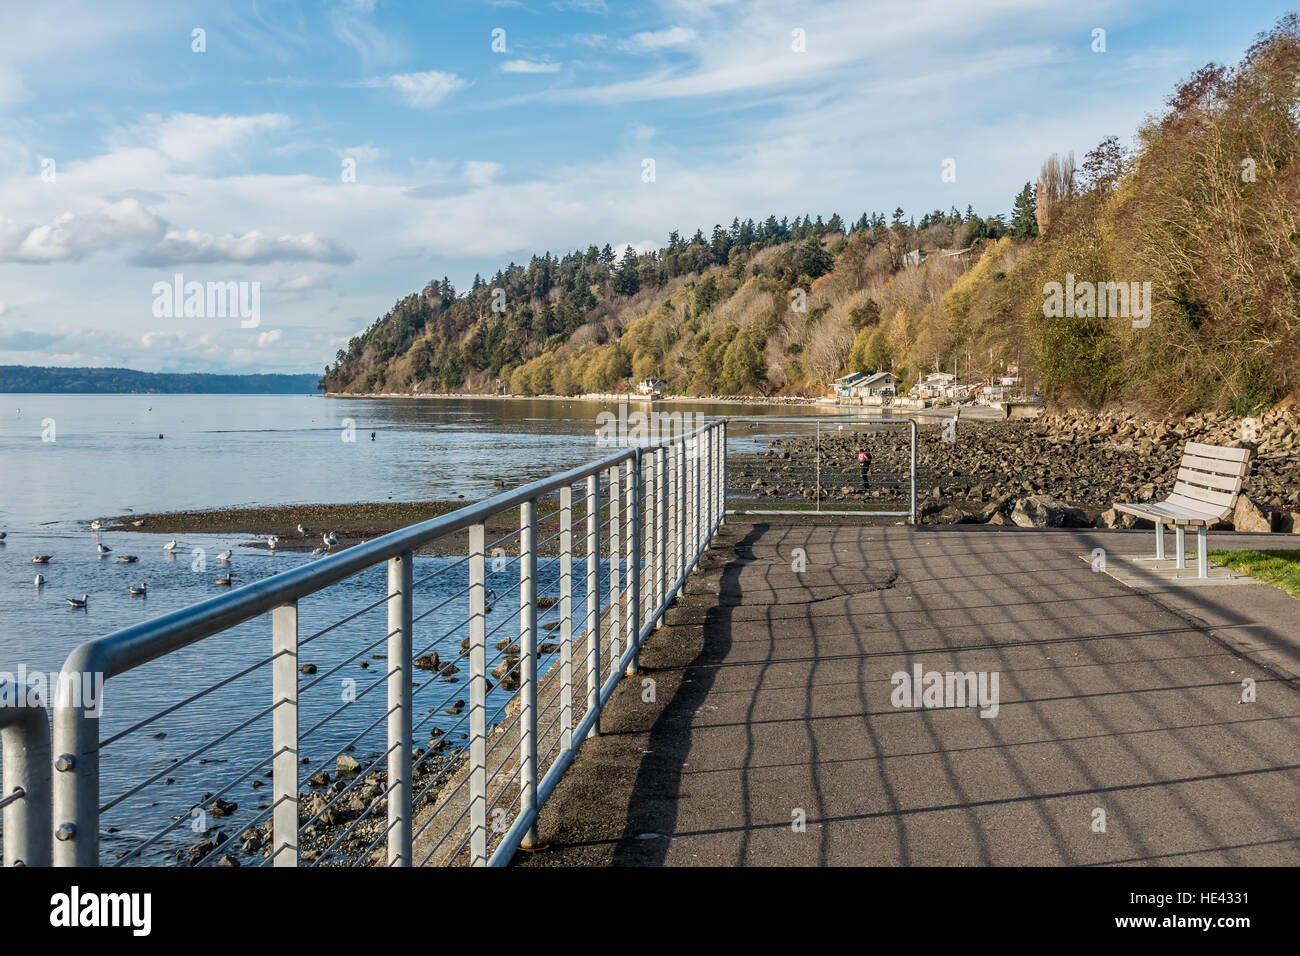 A view of  a metal fence and shoreline at the Des Moines Marina in Des Moines, Washington. Stock Photo